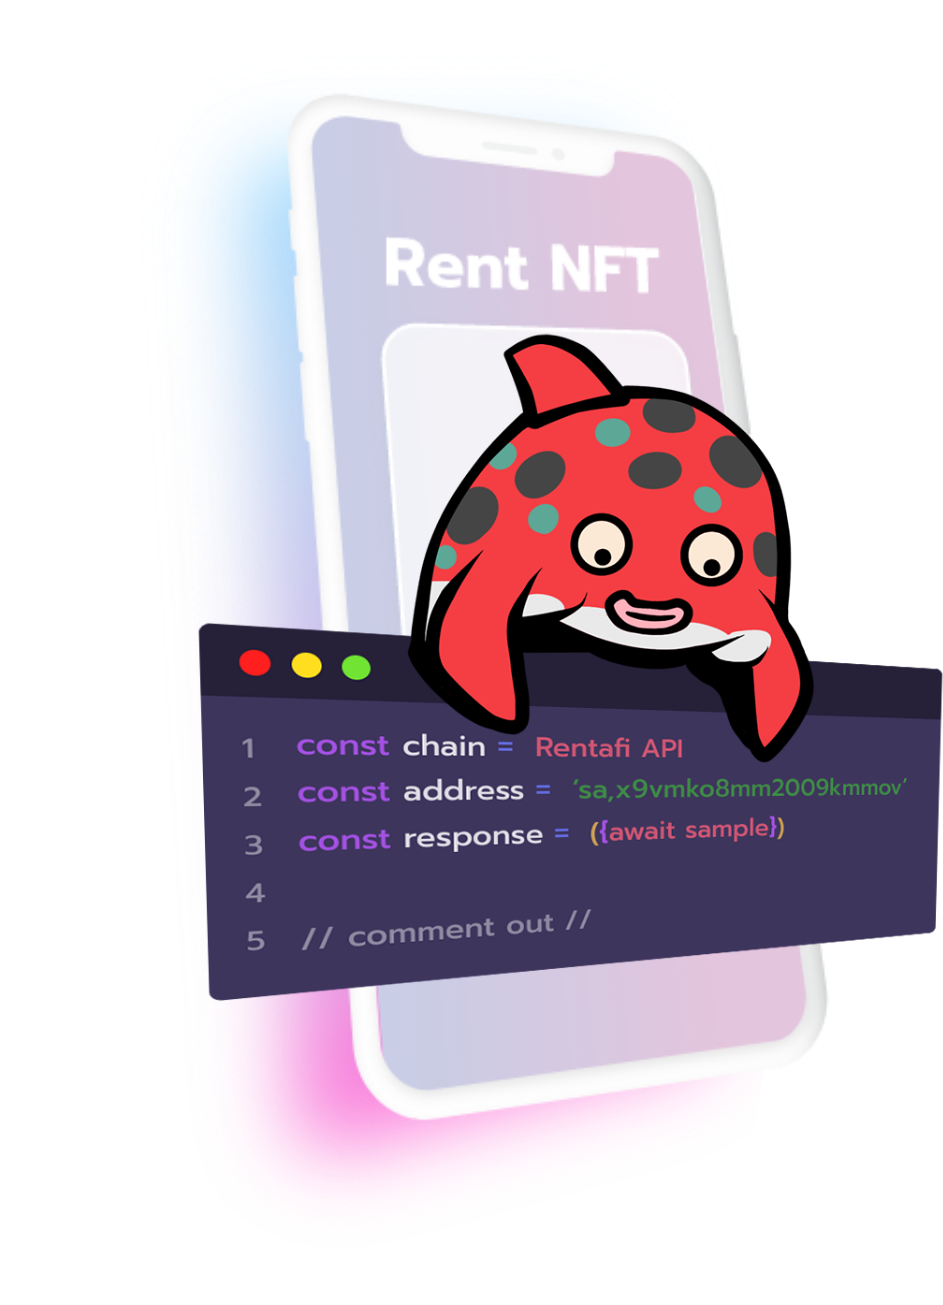 Method for building your own rental marketplace with API / SDK